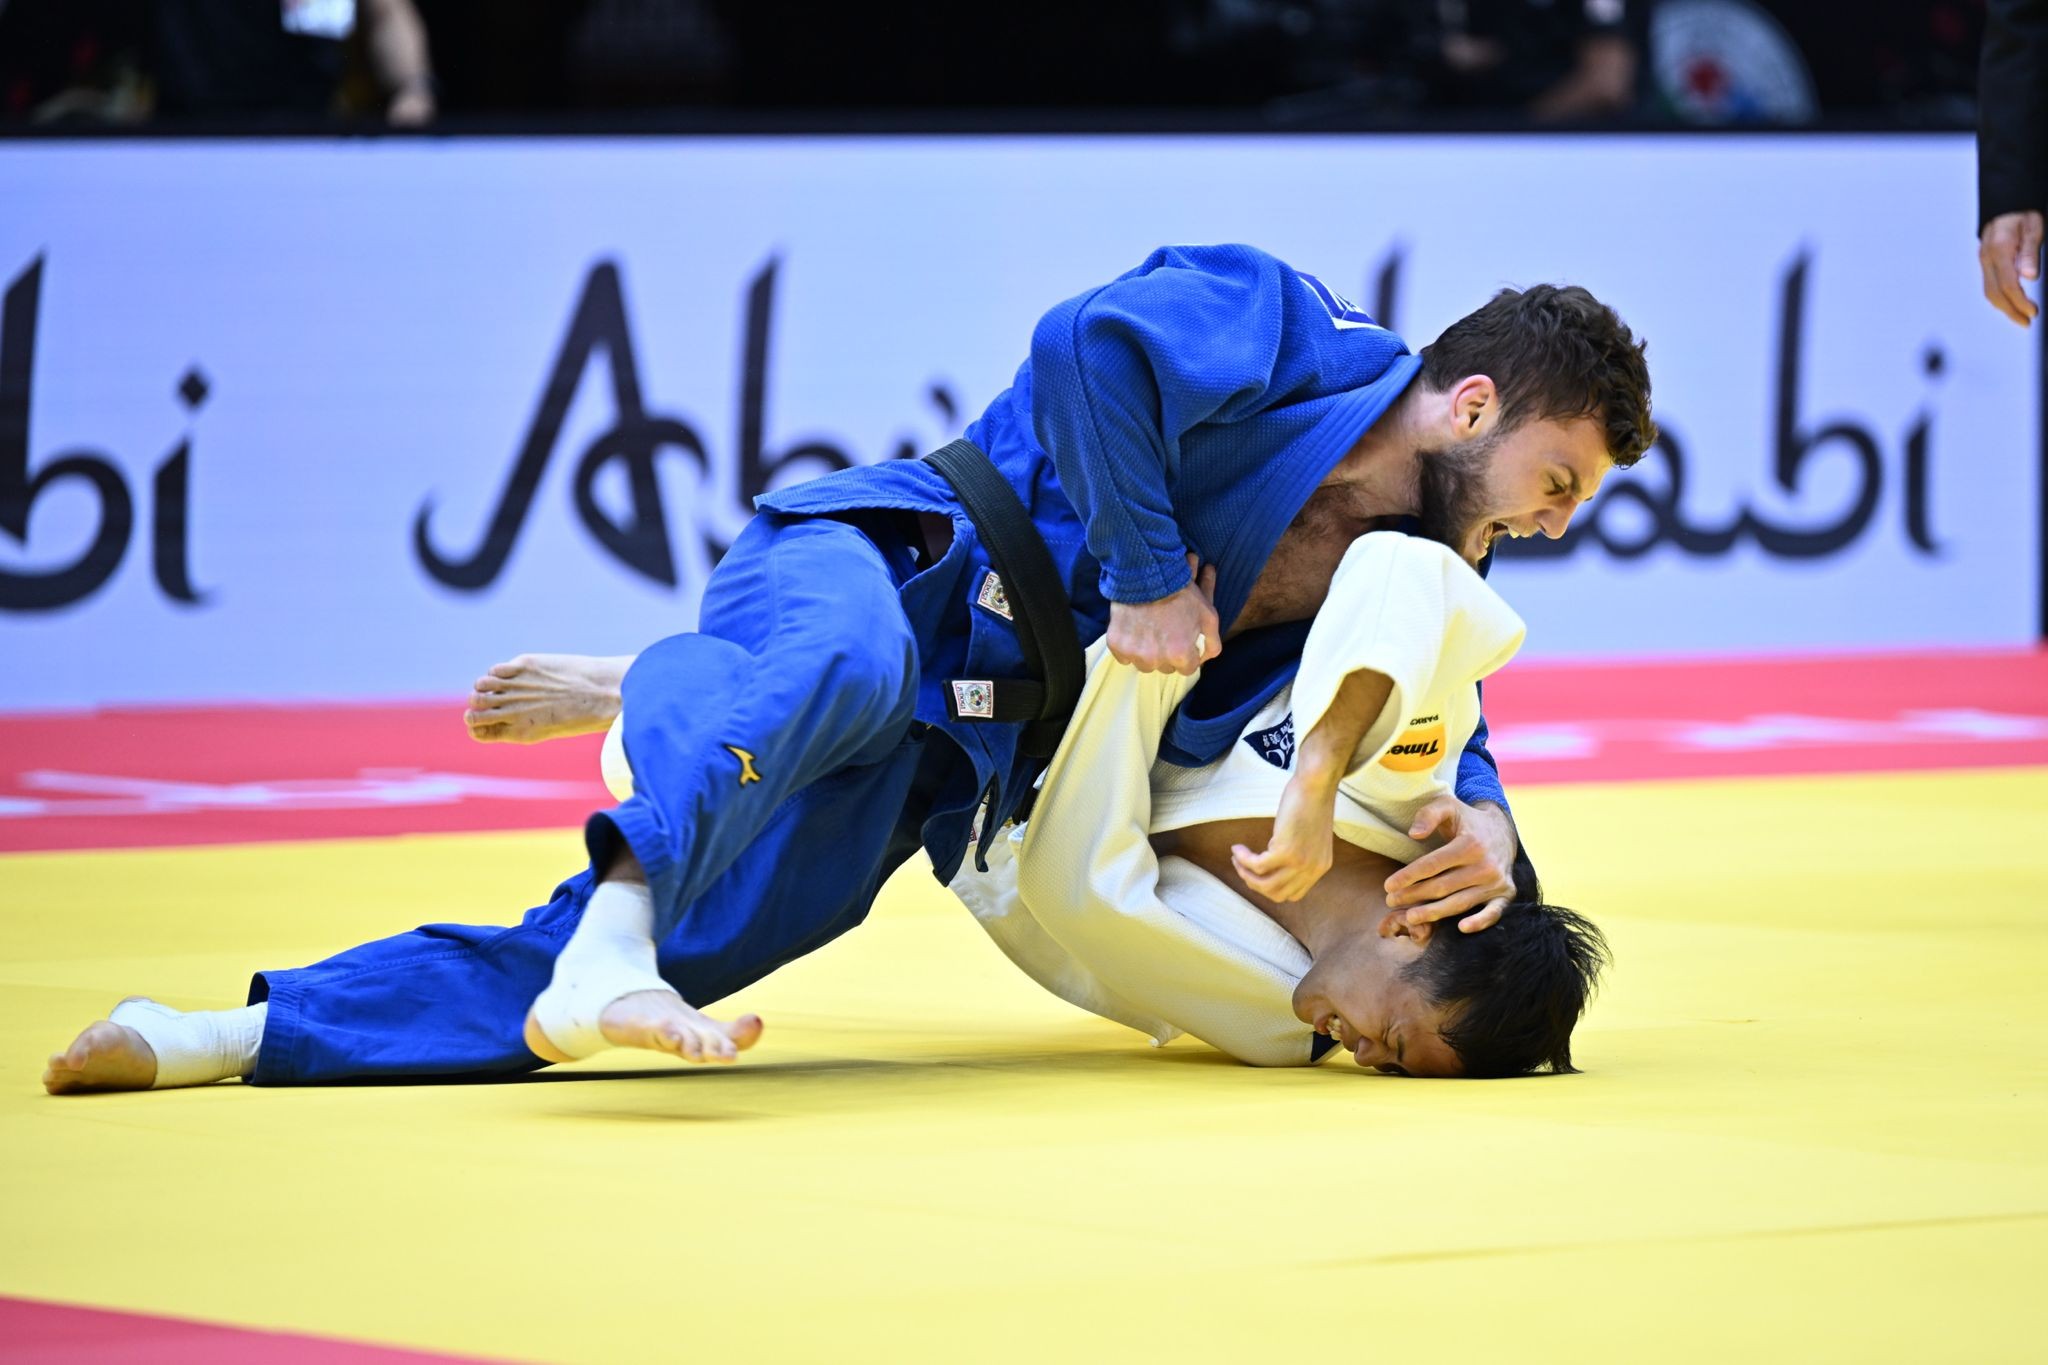 Nagayama’s Quest for First World Title Delayed Once Again / IJF.org